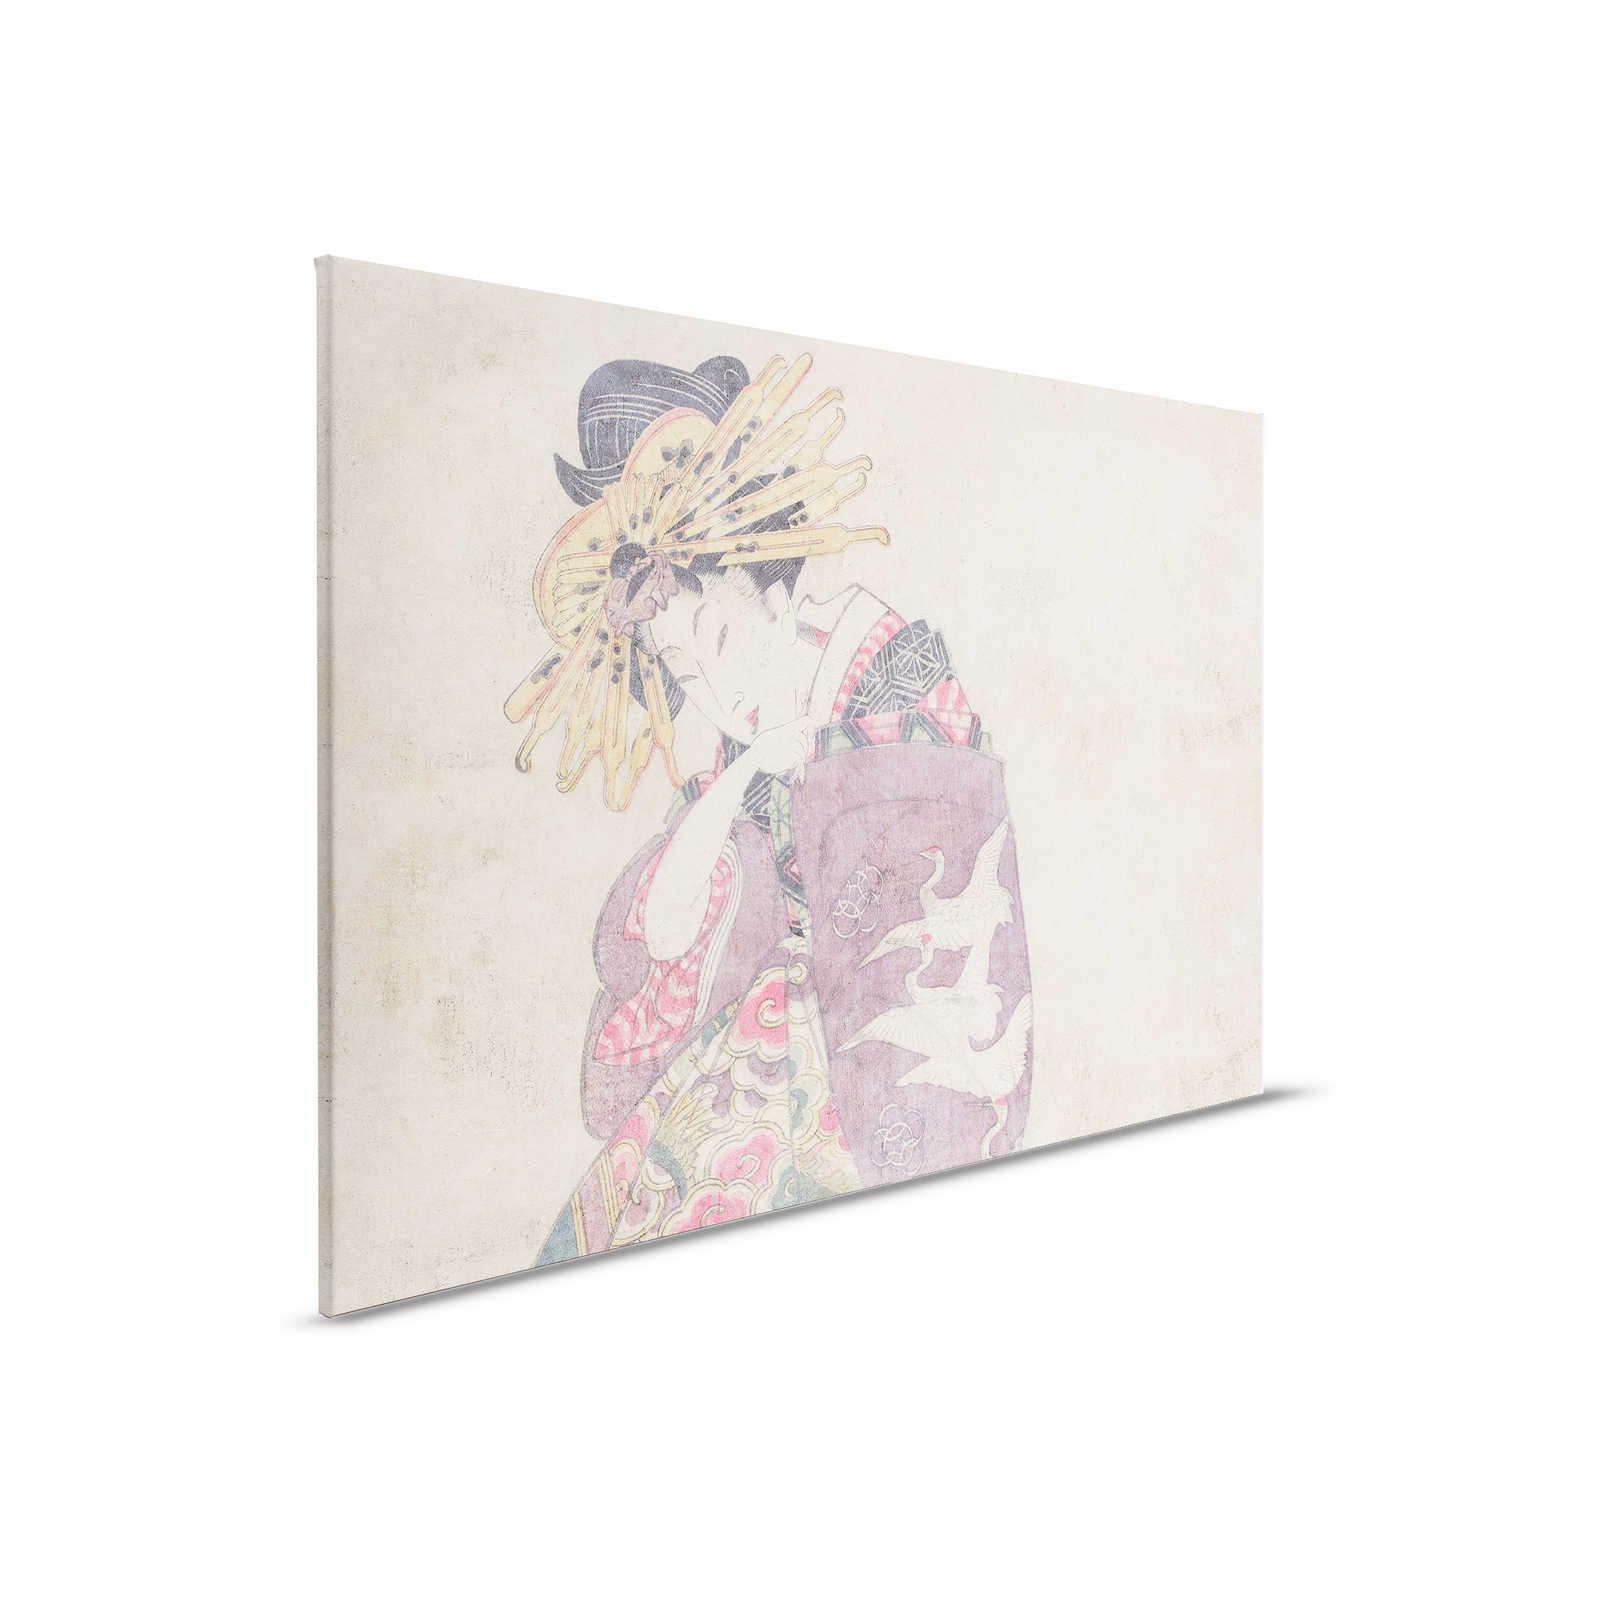 Osaka 1 - Art print canvas picture Asian Dekor in vintage style - 0,90 m x 0,60 m
